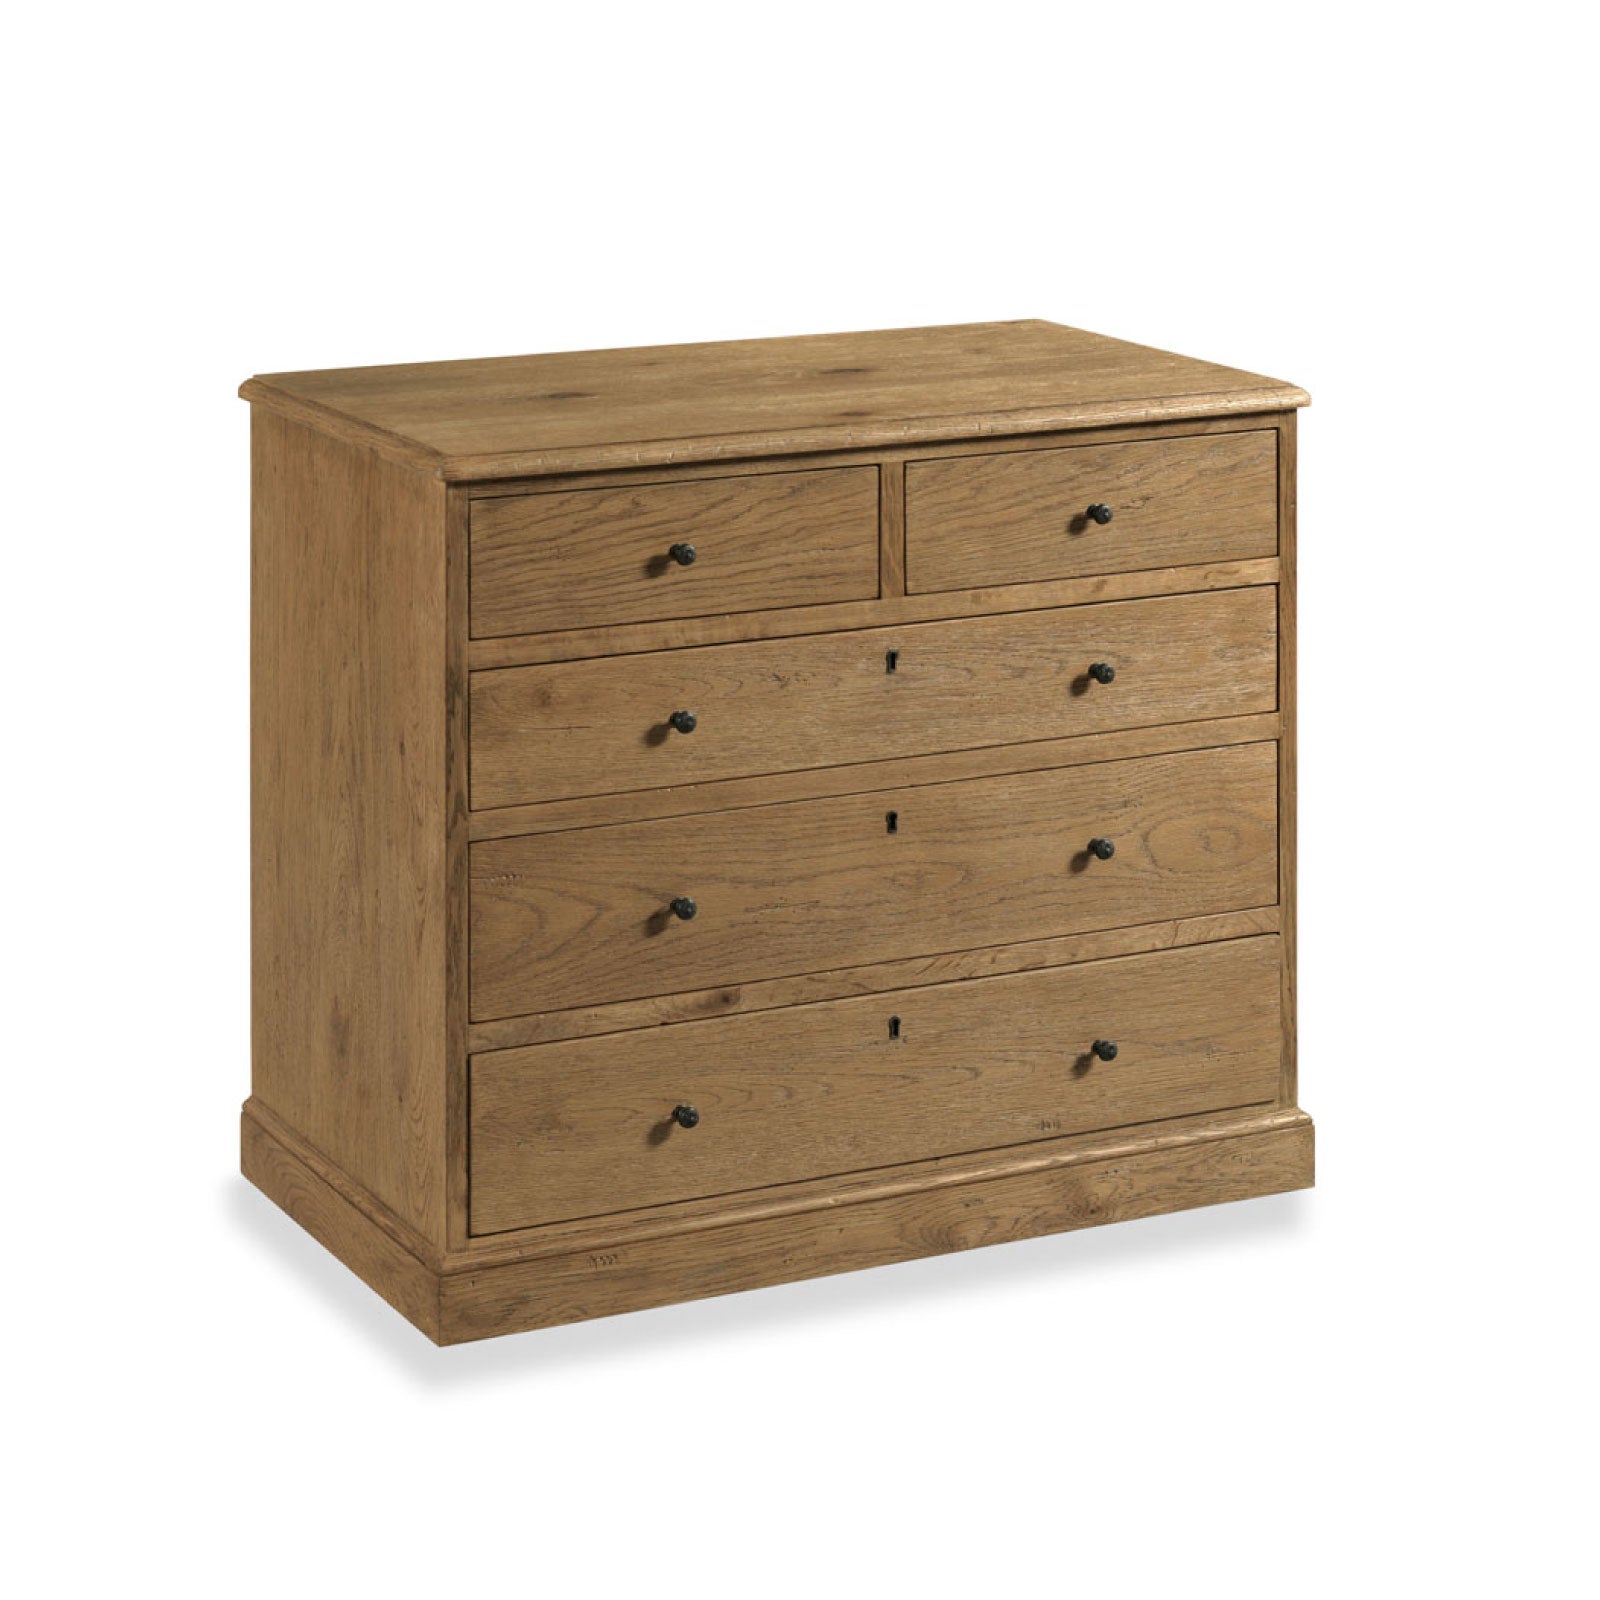 Chest with rectangular top over five individual storage drawers mounted with cast brass floral detailed knobs